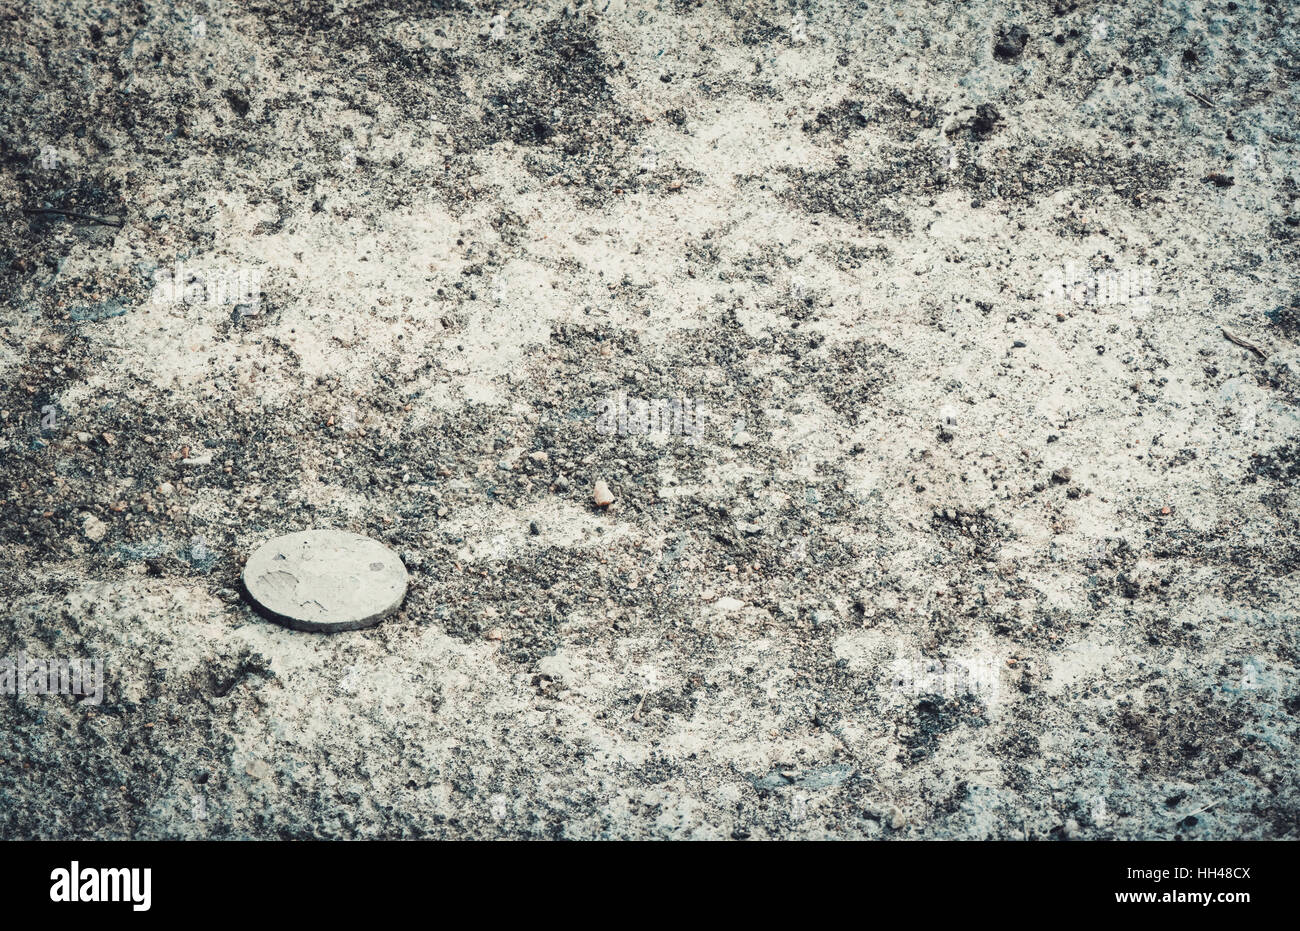 Old coin on ground Stock Photo